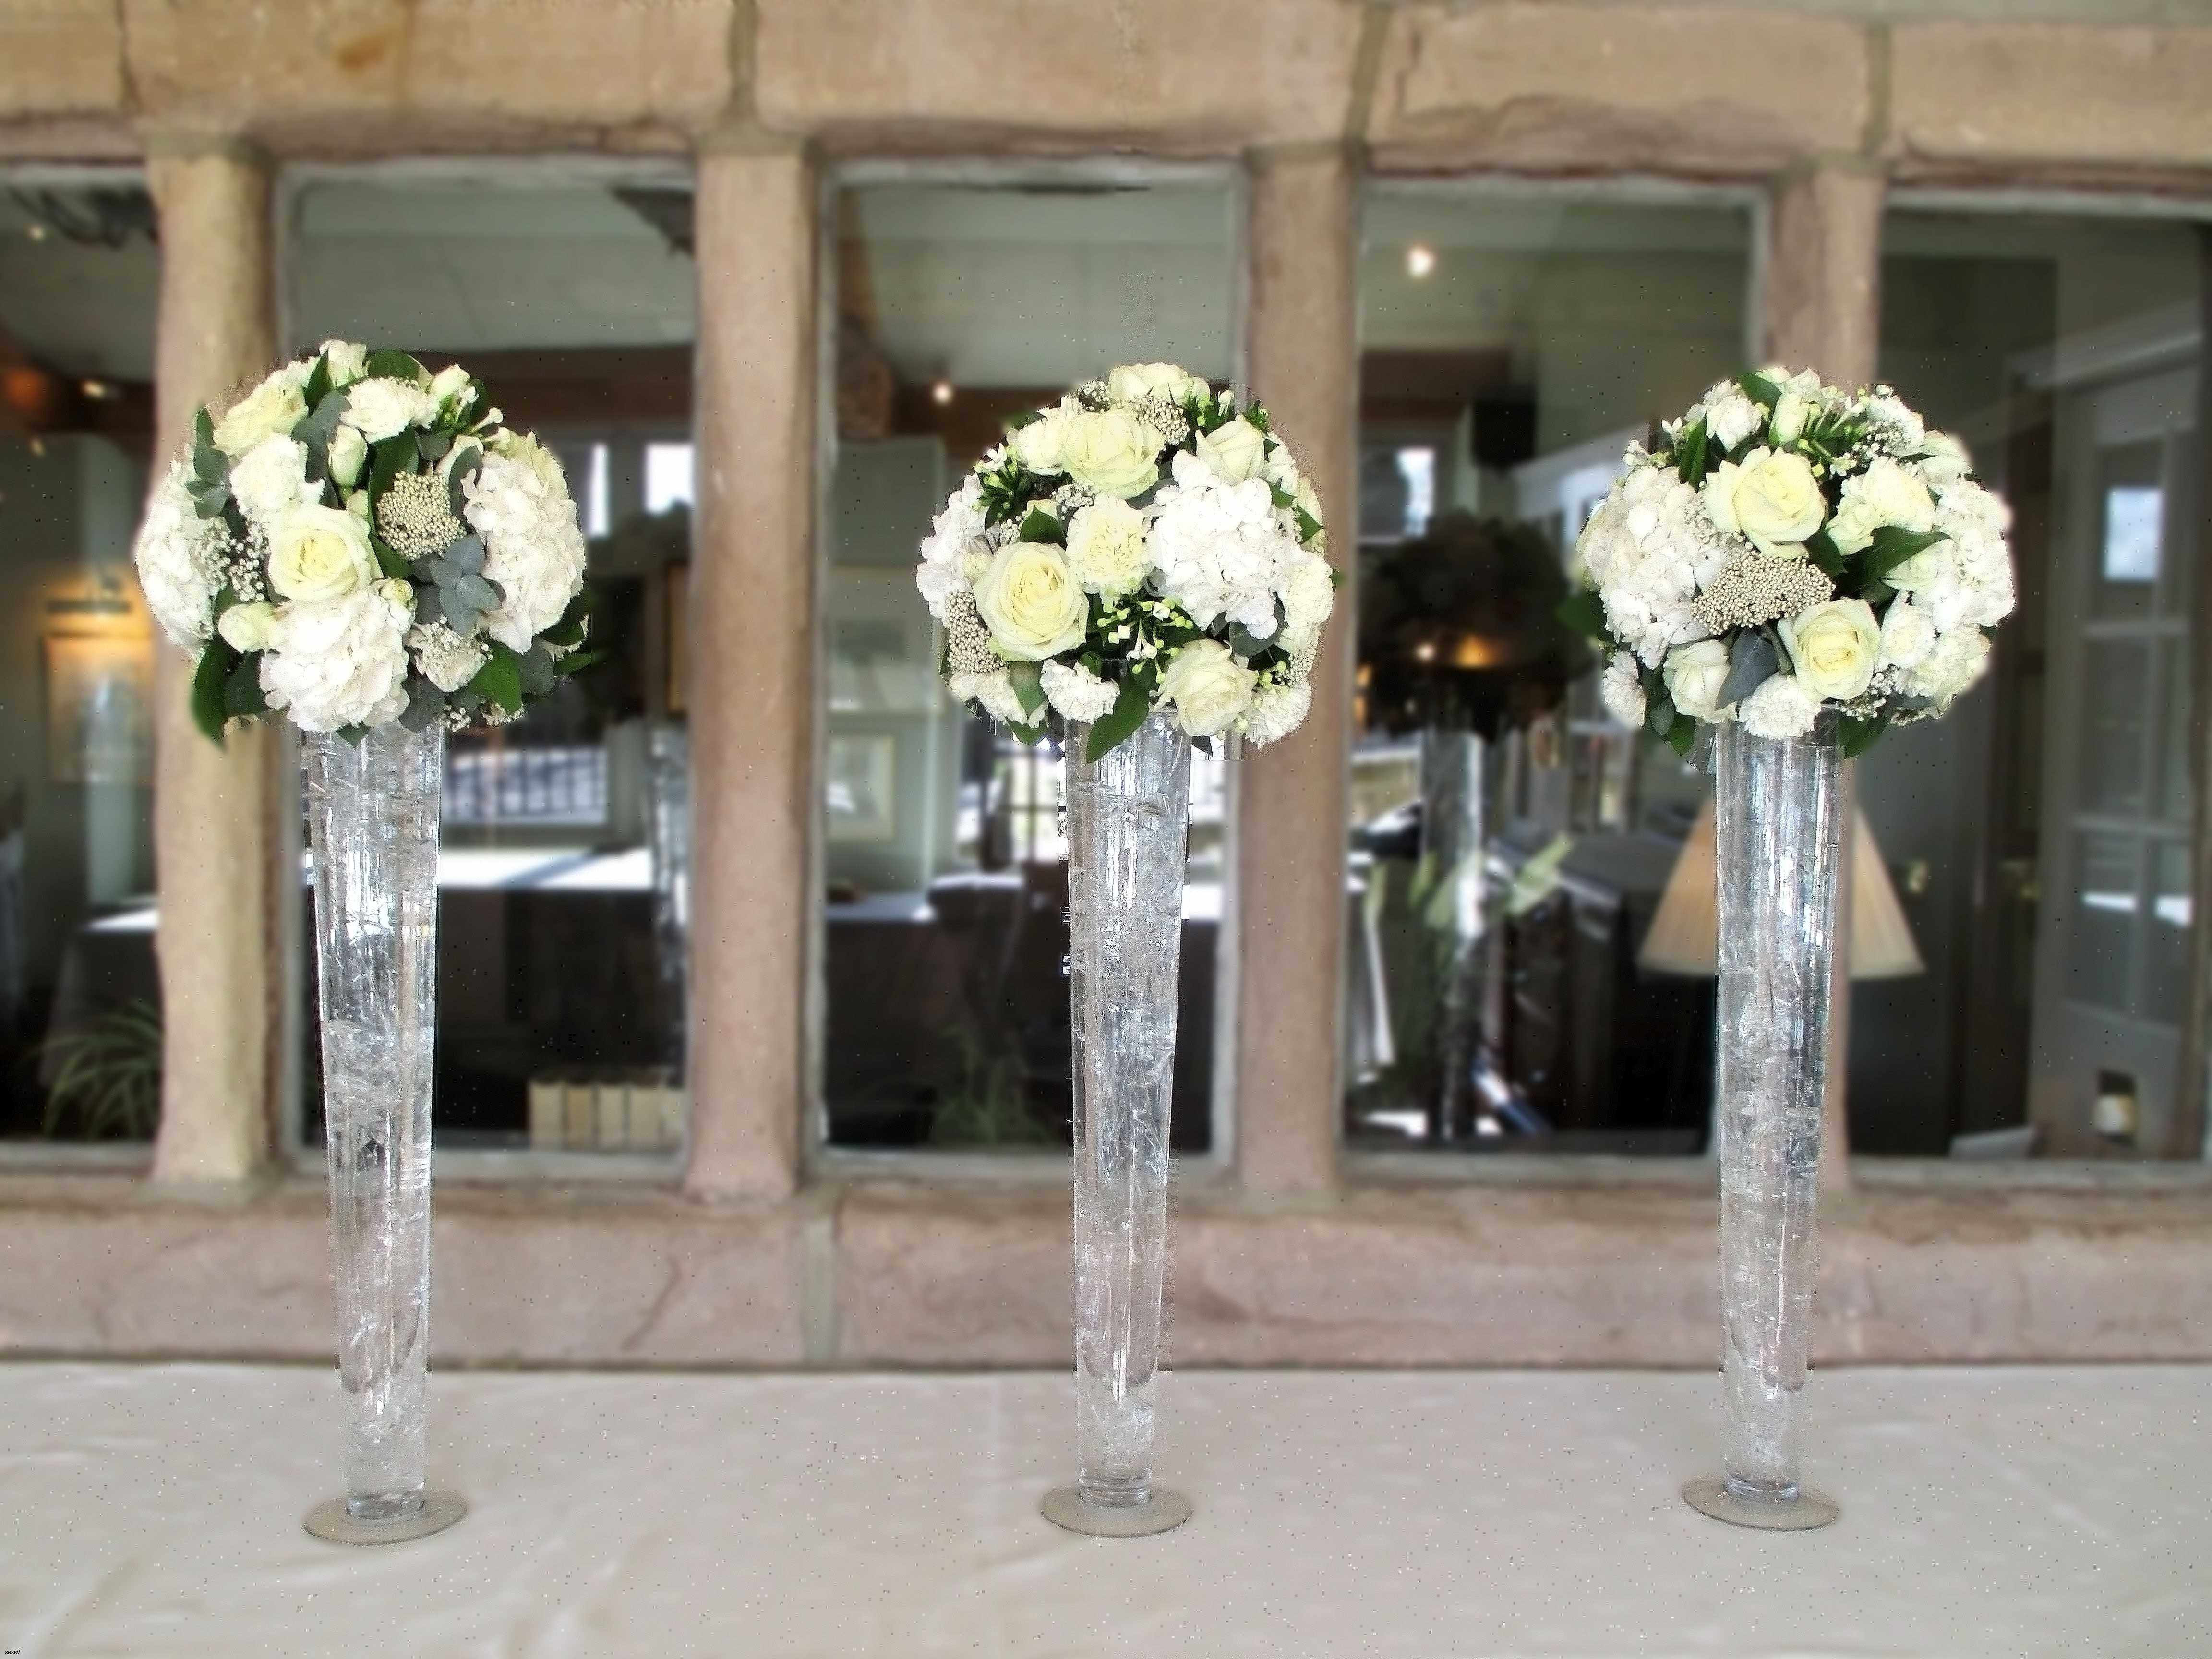 24 Famous Long Vases Wedding Centerpieces 2024 free download long vases wedding centerpieces of cheap wedding ideas luxury living room vases wedding inspirational h within cheap wedding ideas unique vases long vase wedding centerpieces tall reception 